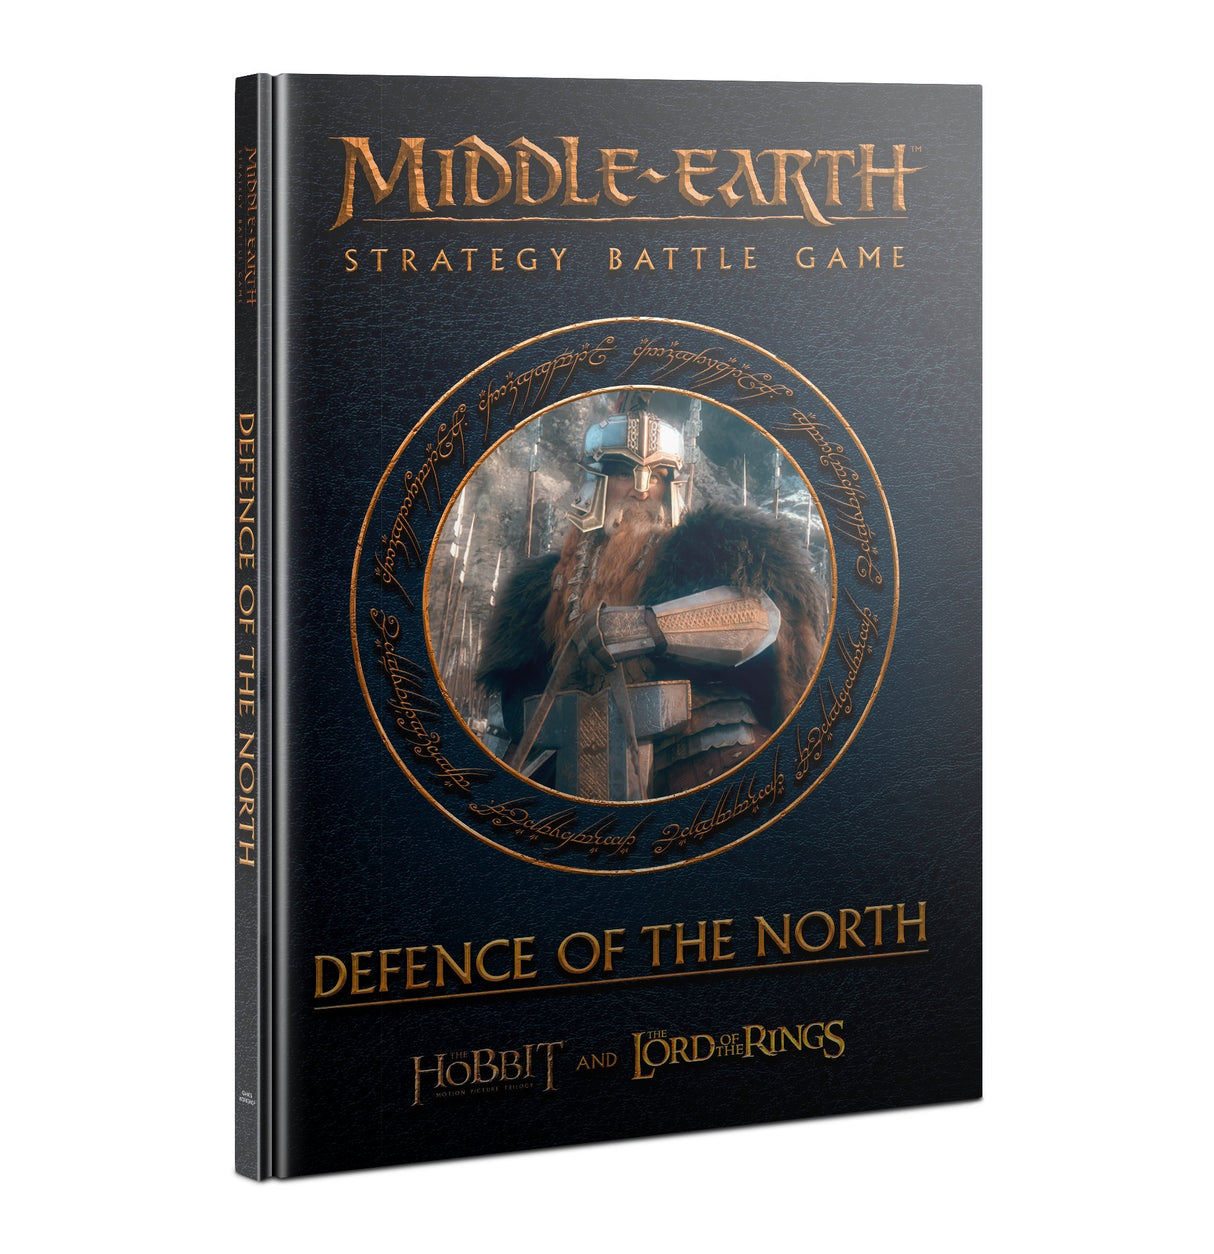 Middle Earth: Strategy Battle Game - Defence of the North